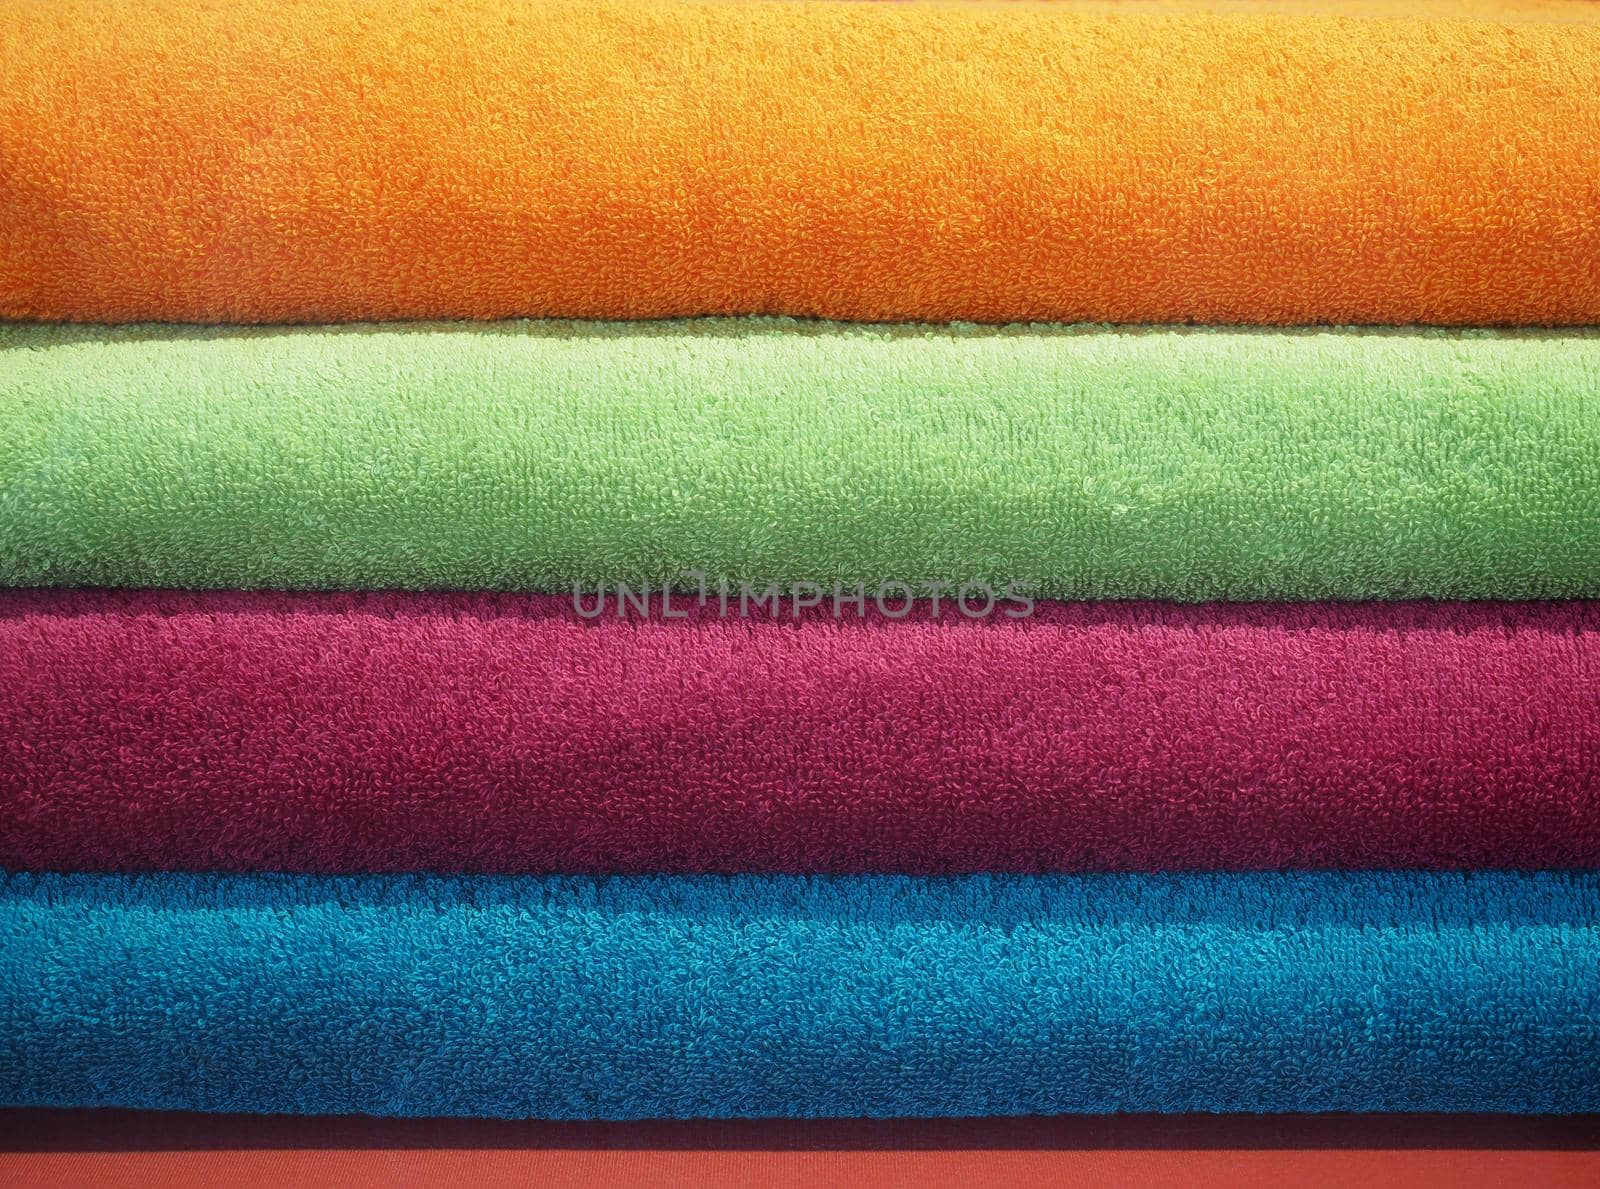 multicolored cotton towels including orange green red and blue useful as a background